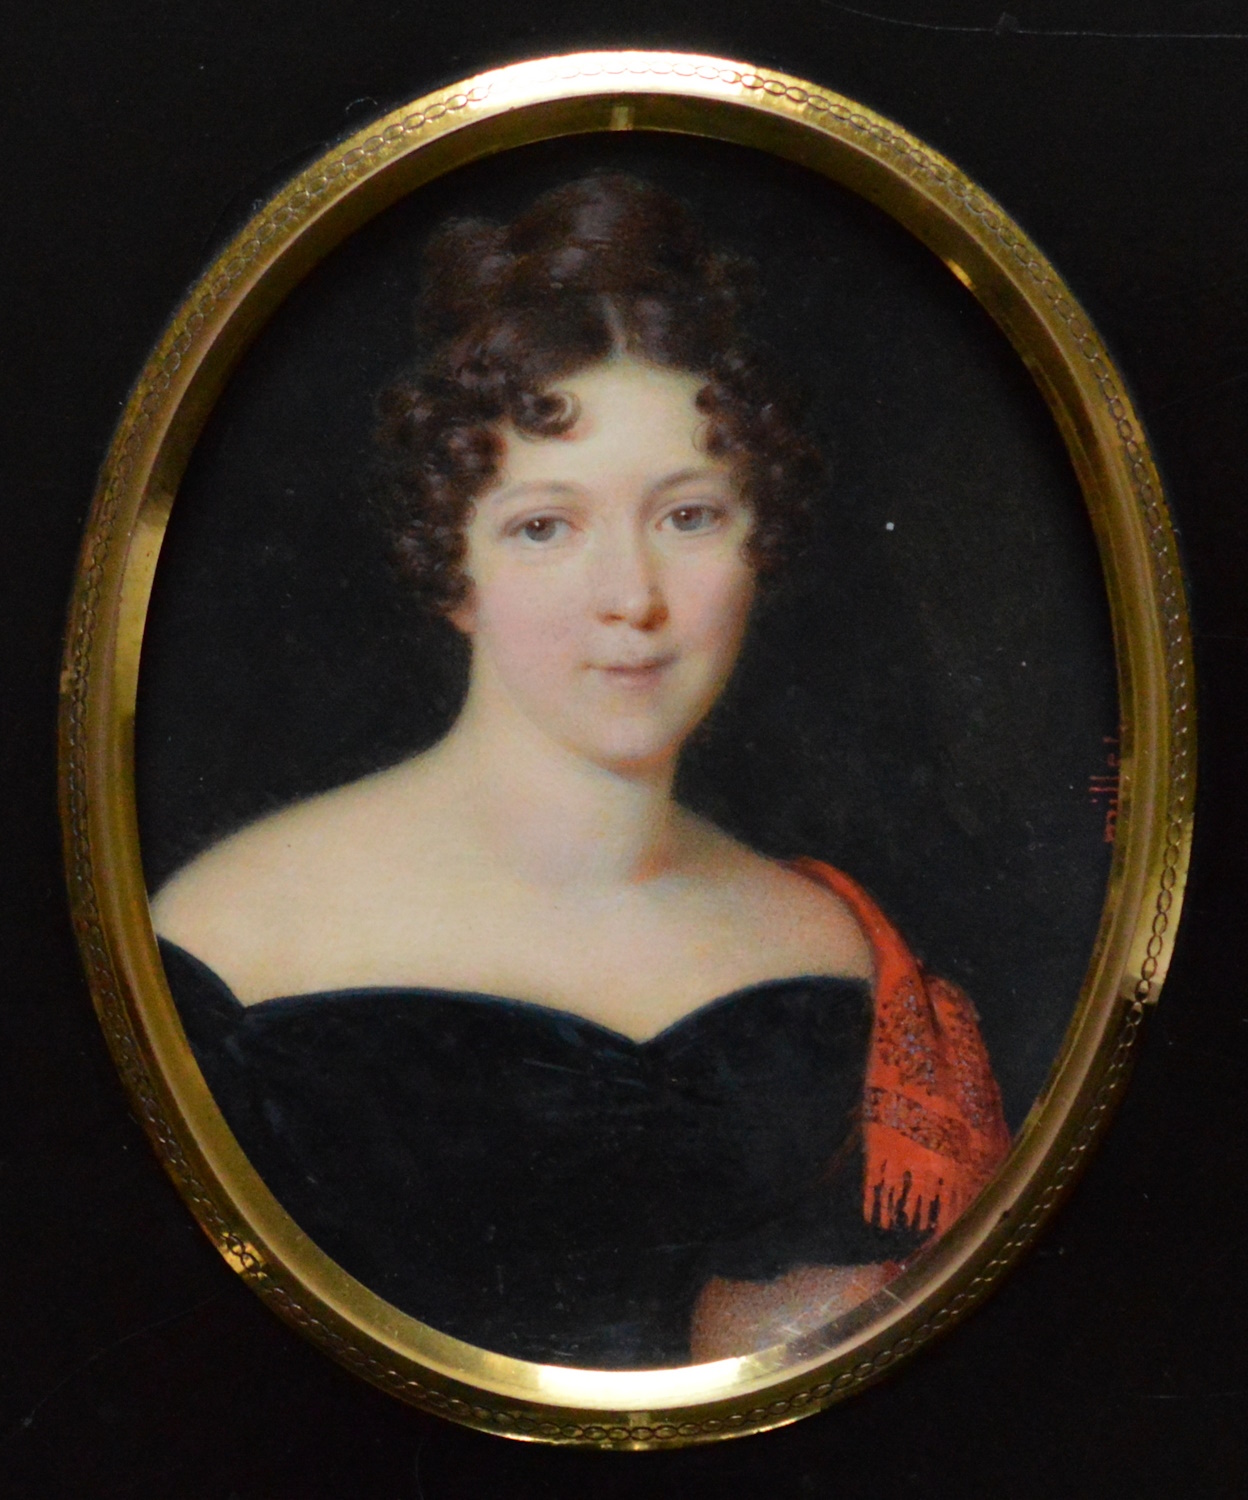 Frédéric Millet – Miniature portrait of a Lady Wearing a Black Dress with a Red Scarf Draped over Her Left Shoulder